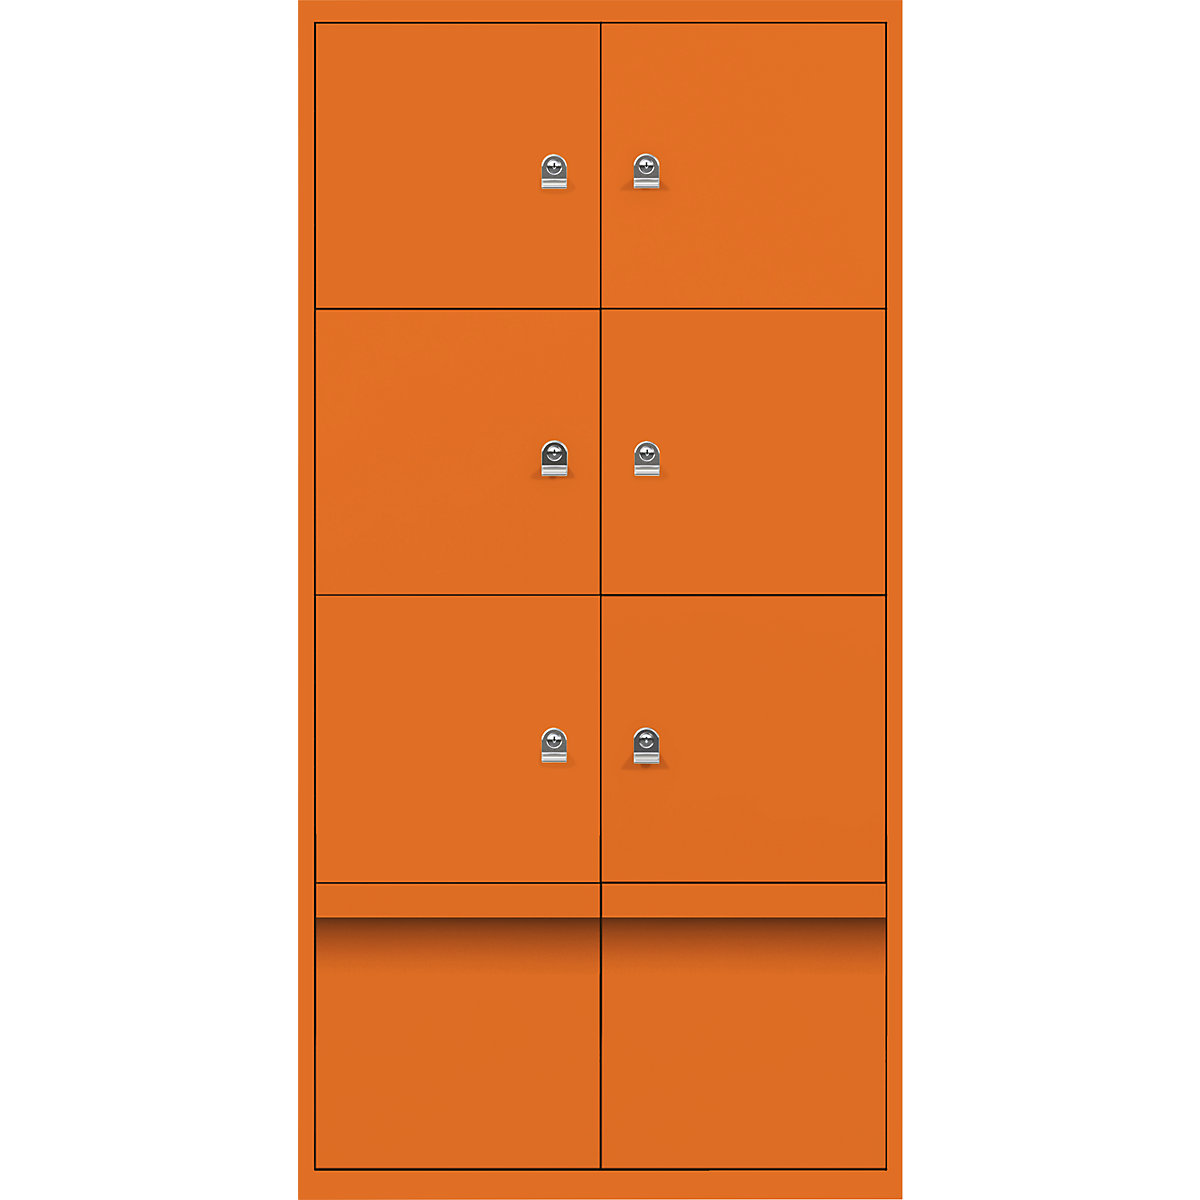 BISLEY – LateralFile™ lodge, with 6 lockable compartments and 2 drawers, height 375 mm each, orange